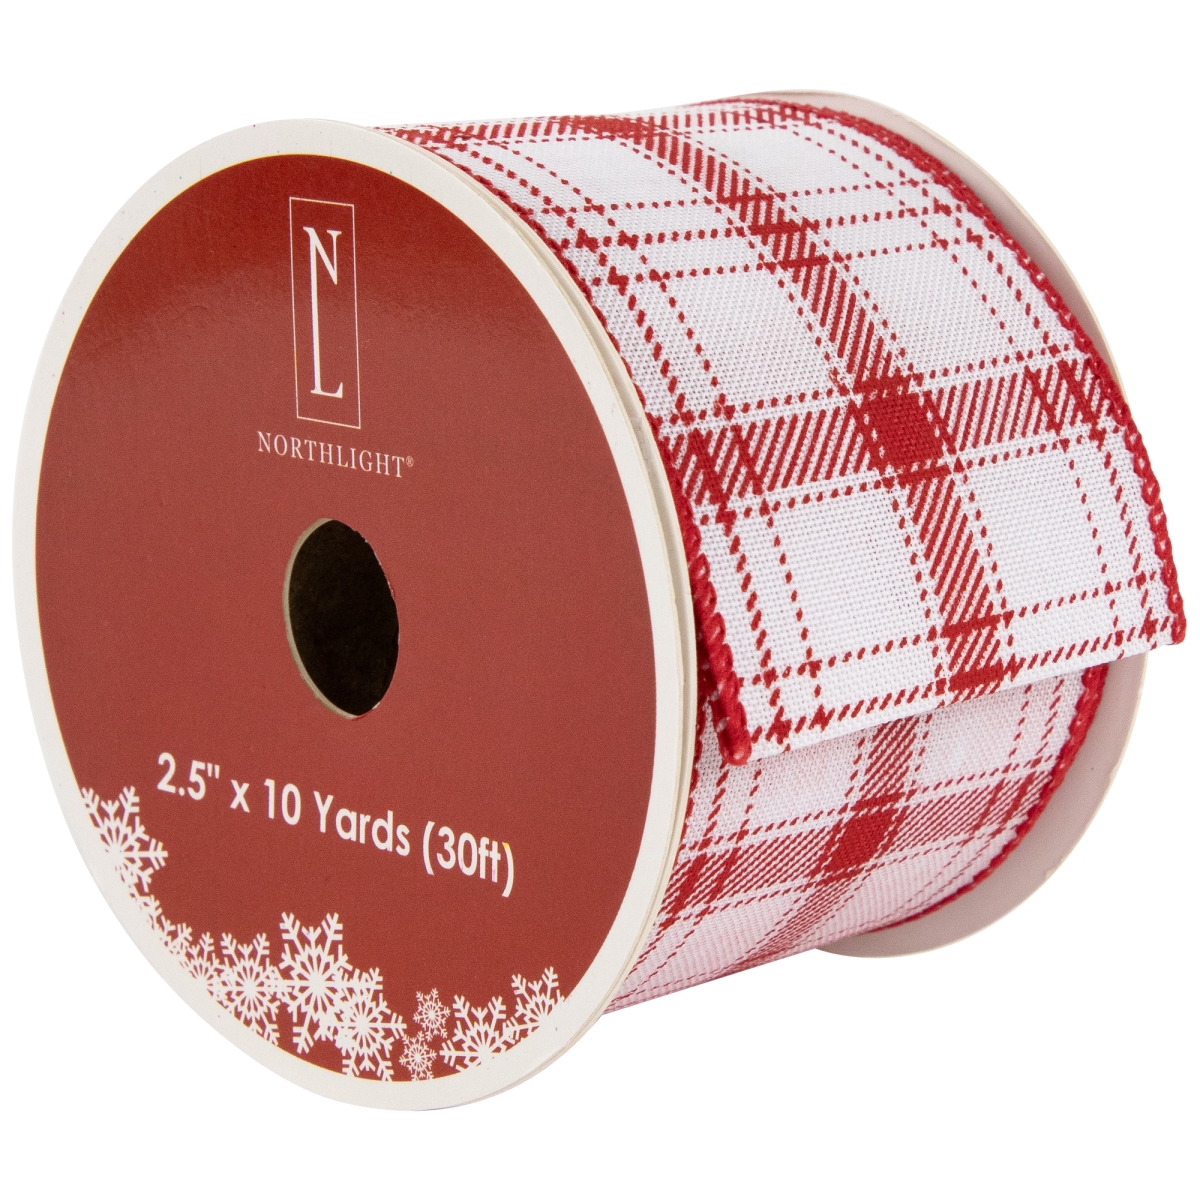 Picture of Northlight 35681117 2.5 in. x 10 Yards Red & White Plaid Wired Craft Christmas Ribbon